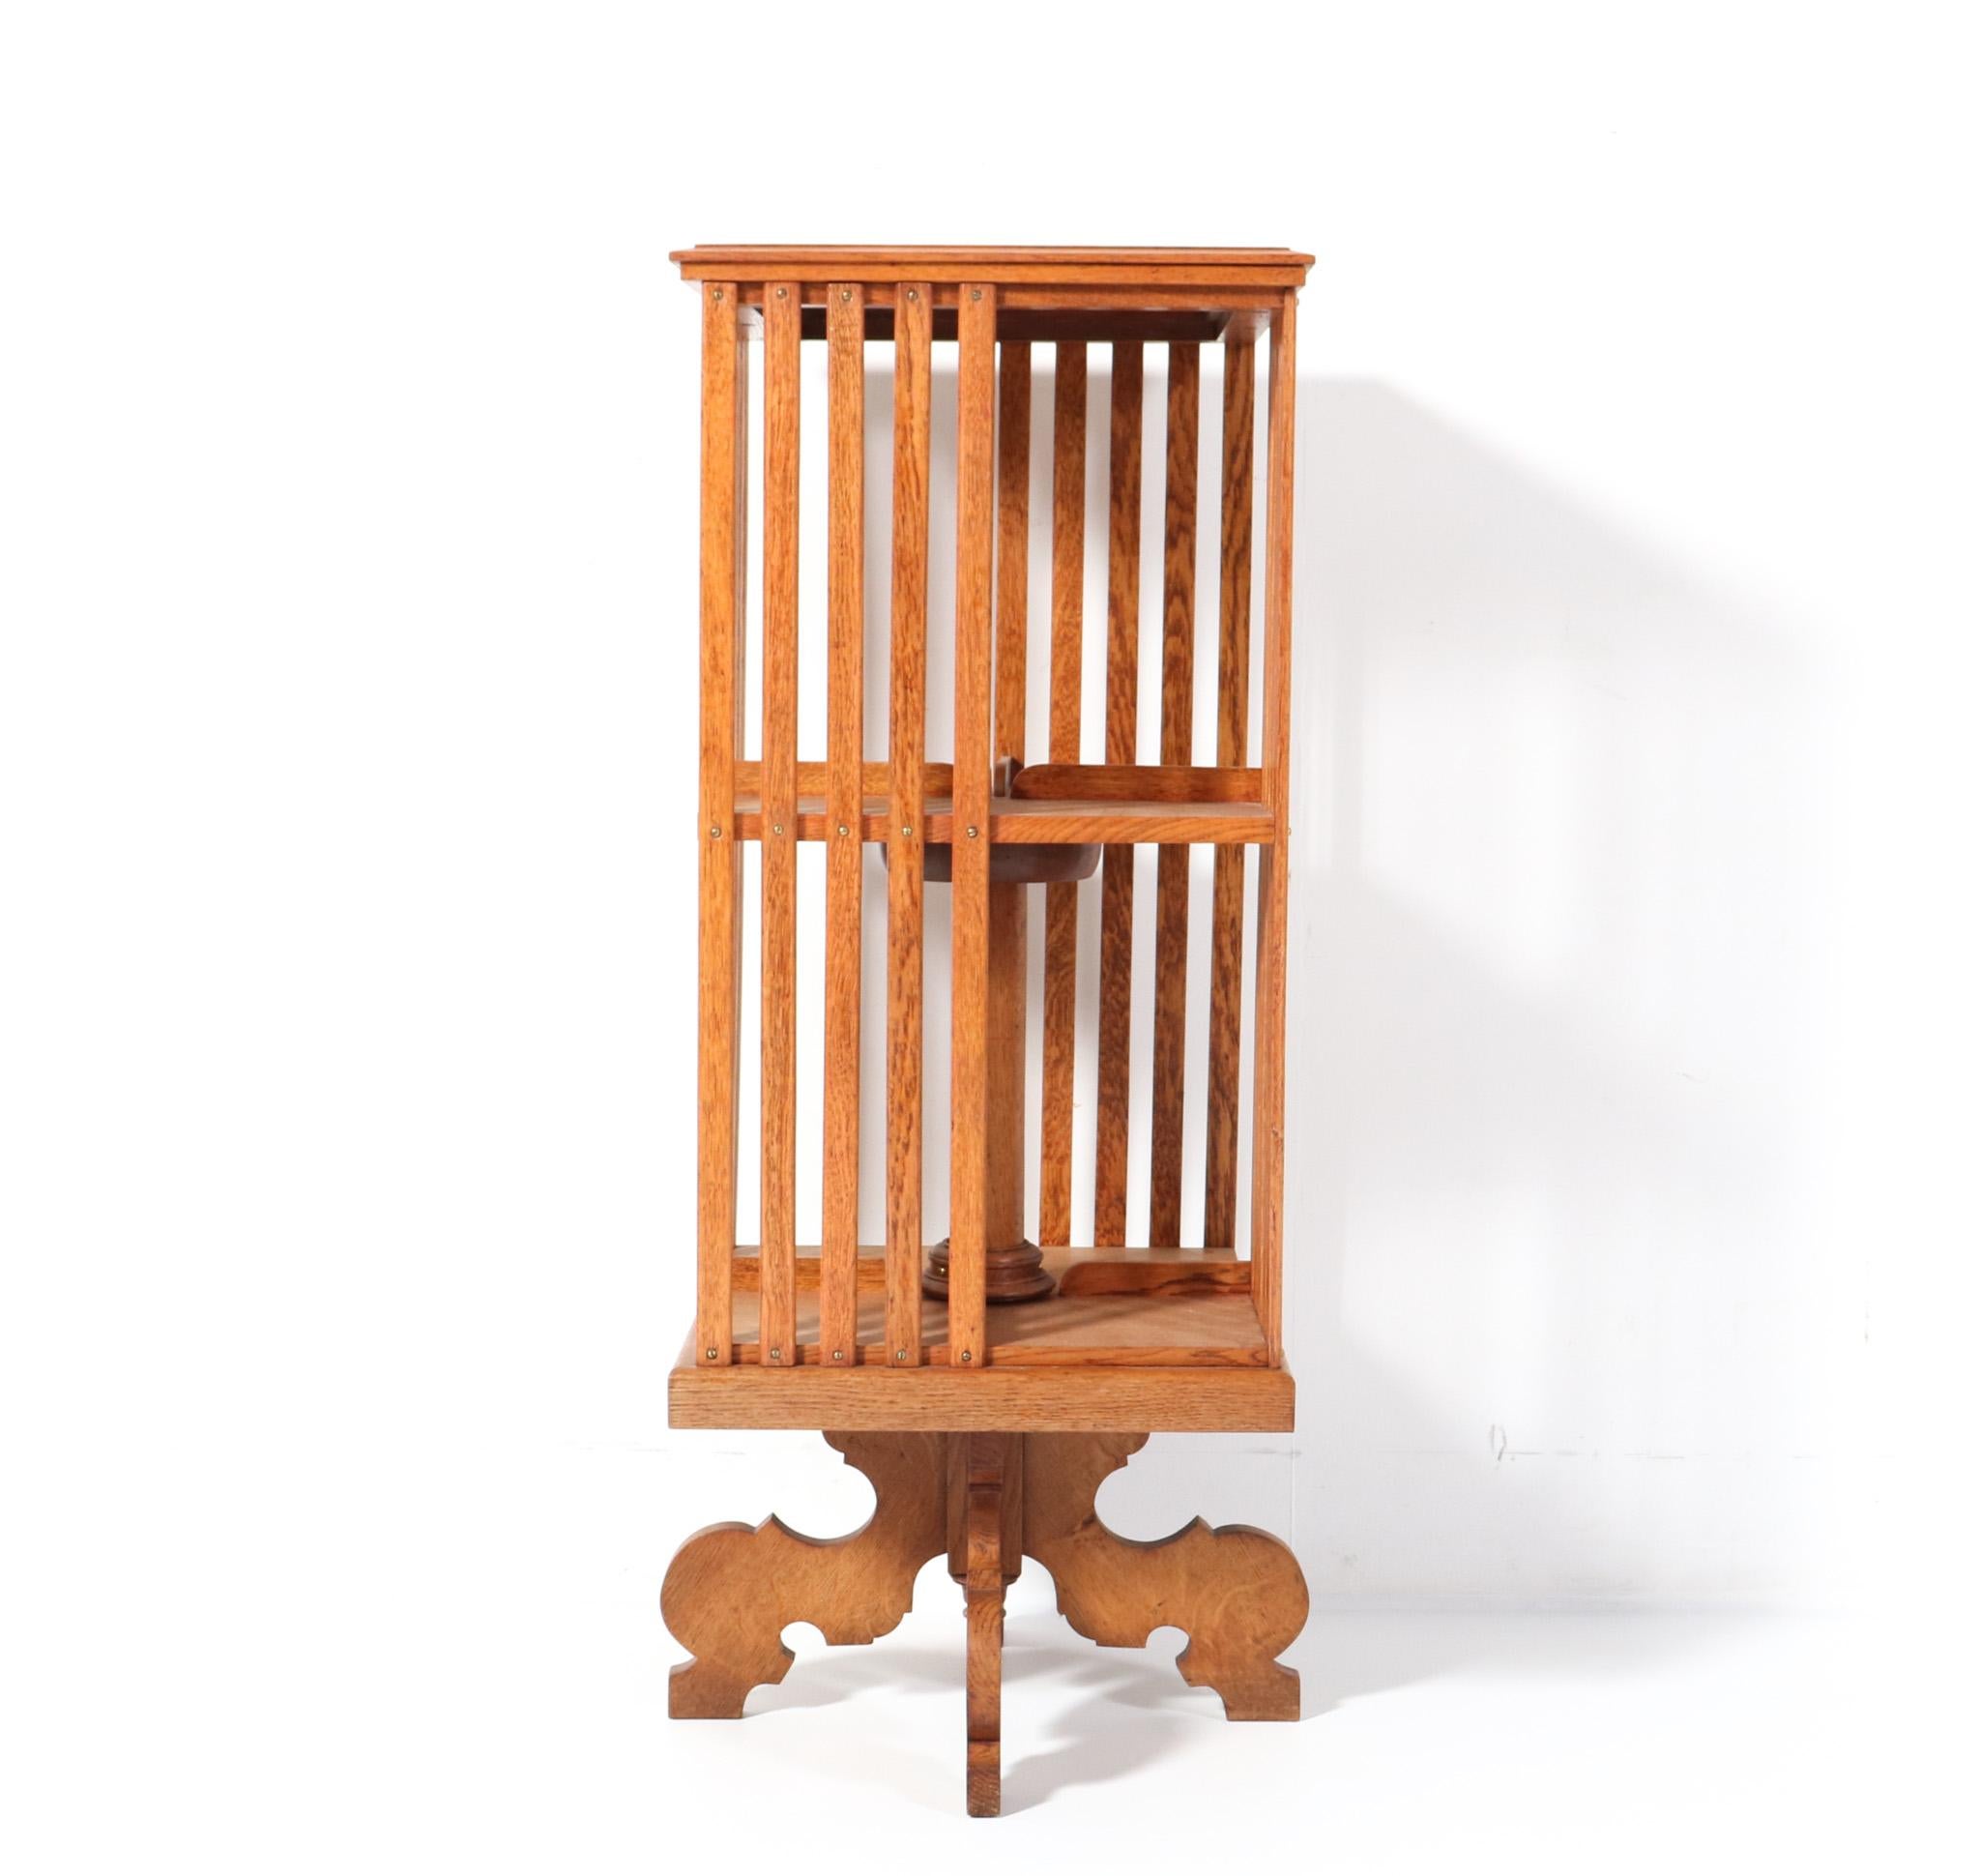 Stunning and elegant  Art Nouveau Jugendstil revolving bookcase. Striking Dutch design from the 1900s. Solid oak and the wheels are in good working order. This wonderful Art Nouveau Jugendstil revolving bookcase is in very good condition with minor